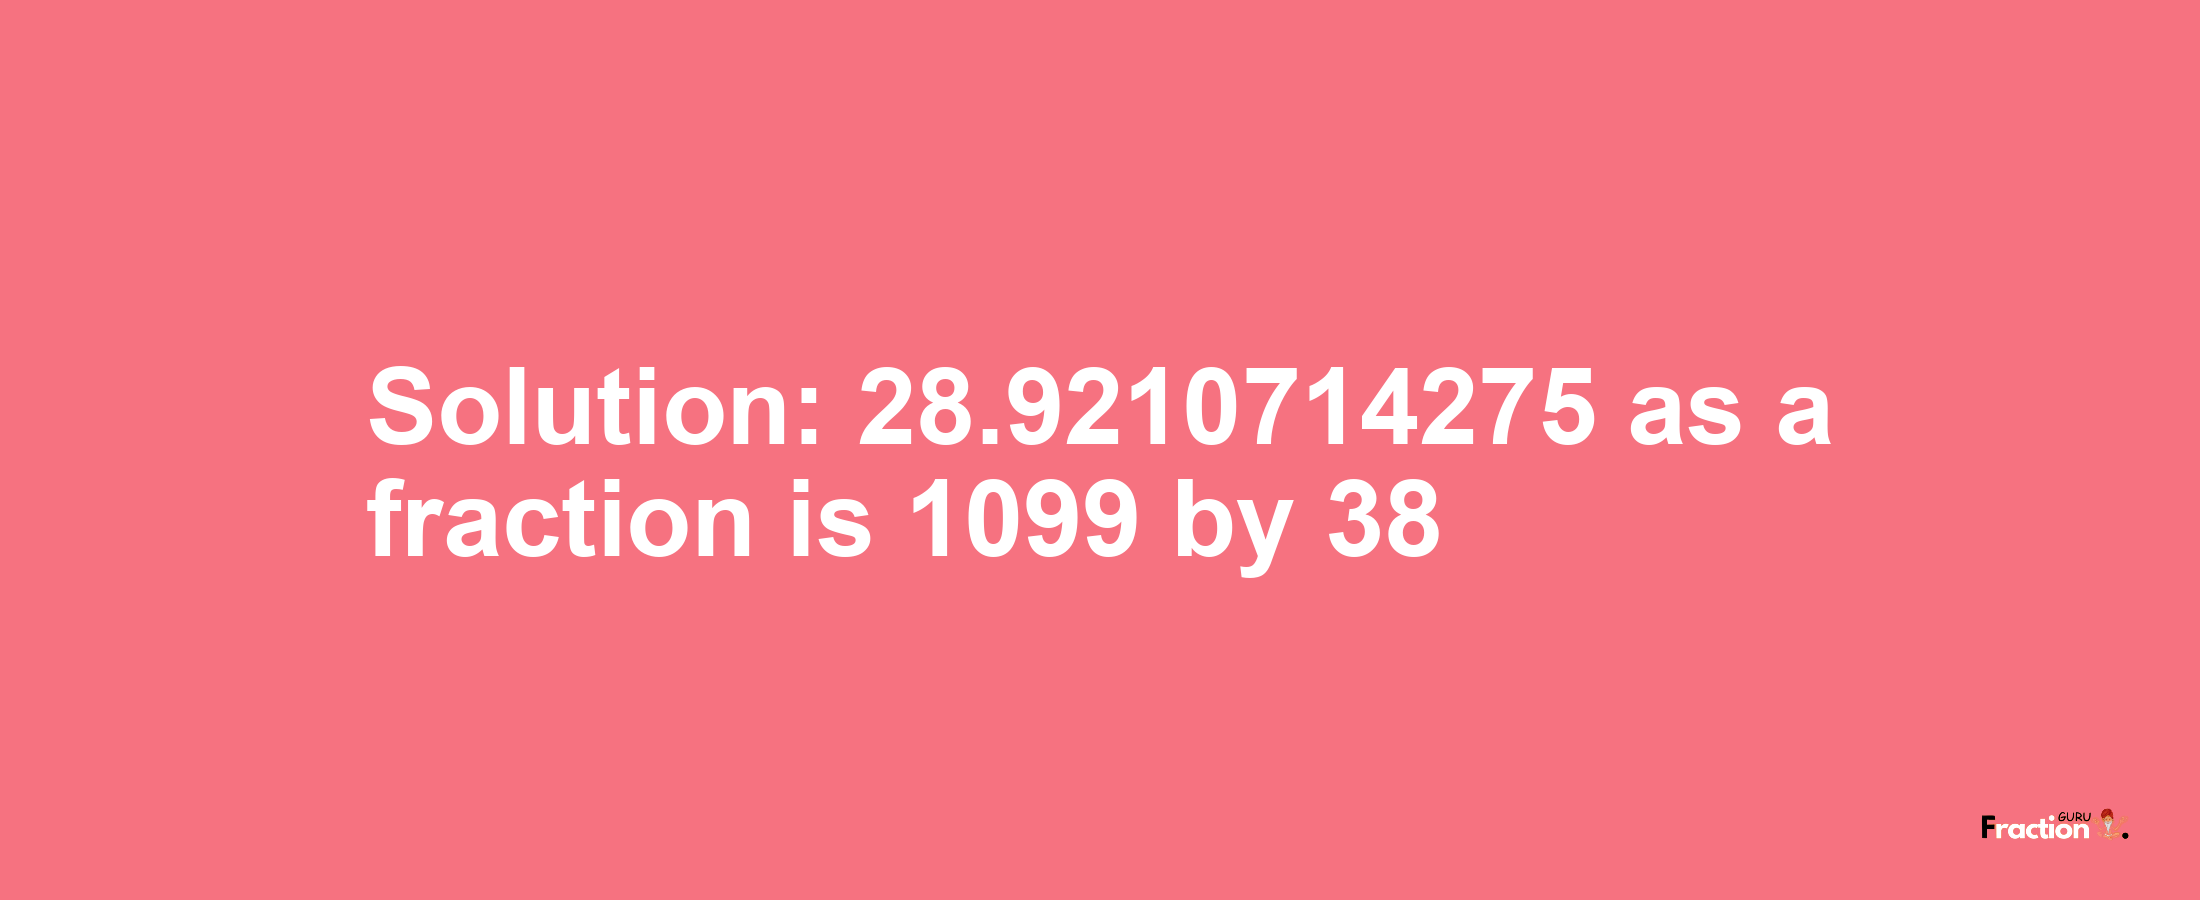 Solution:28.9210714275 as a fraction is 1099/38